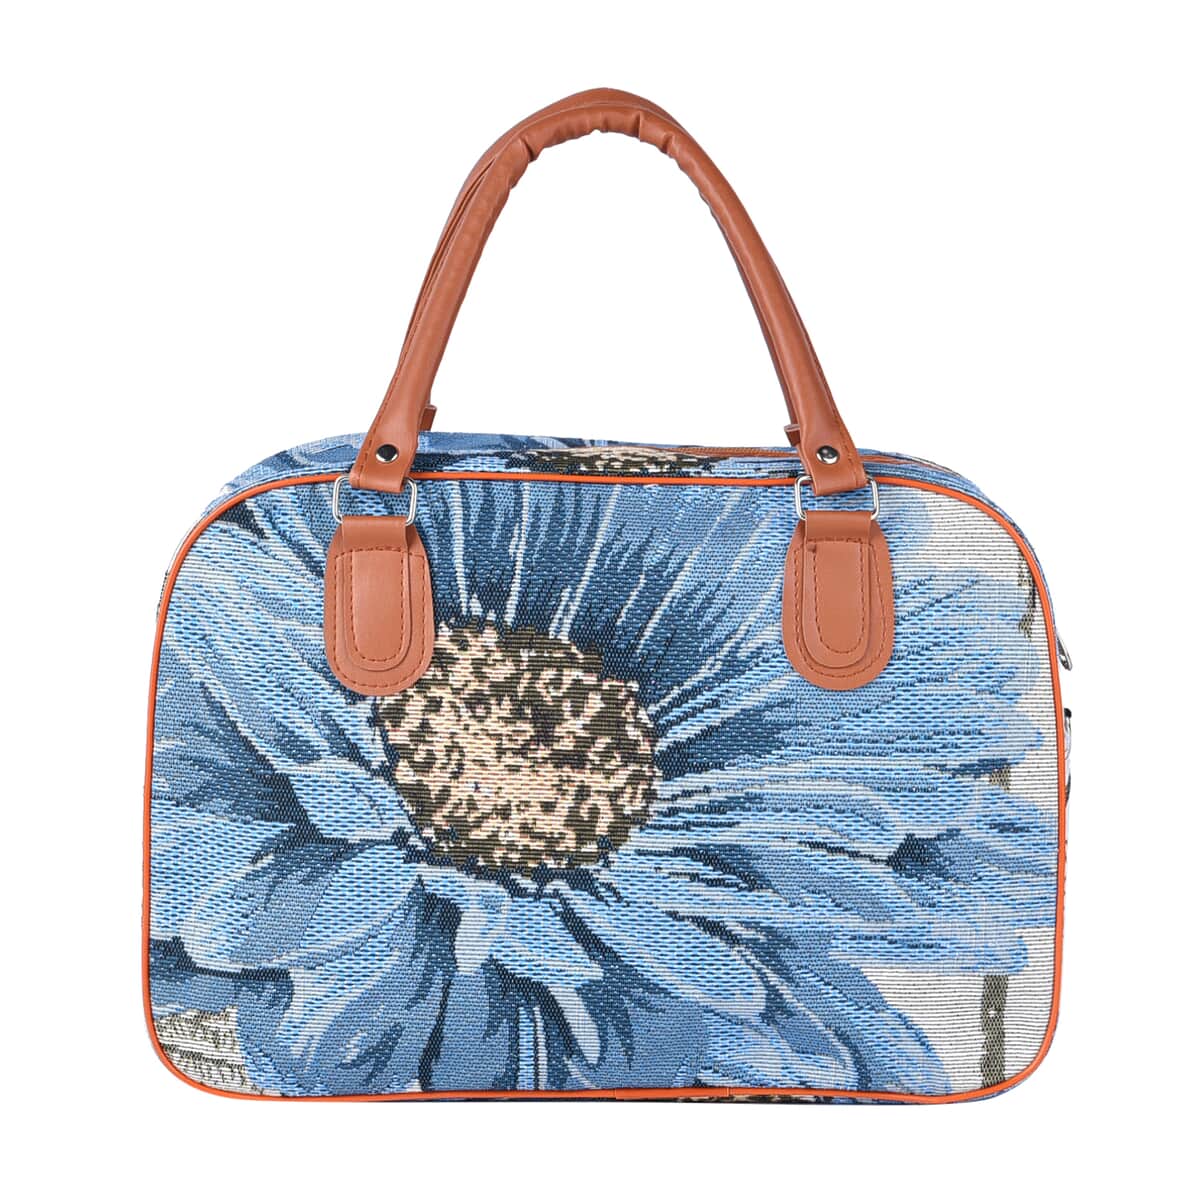 Off White and Blue Flower Pattern Jute Travel Bag (14.17"x5.9"x9.06") with 38 Inches Shoulder Strap image number 0